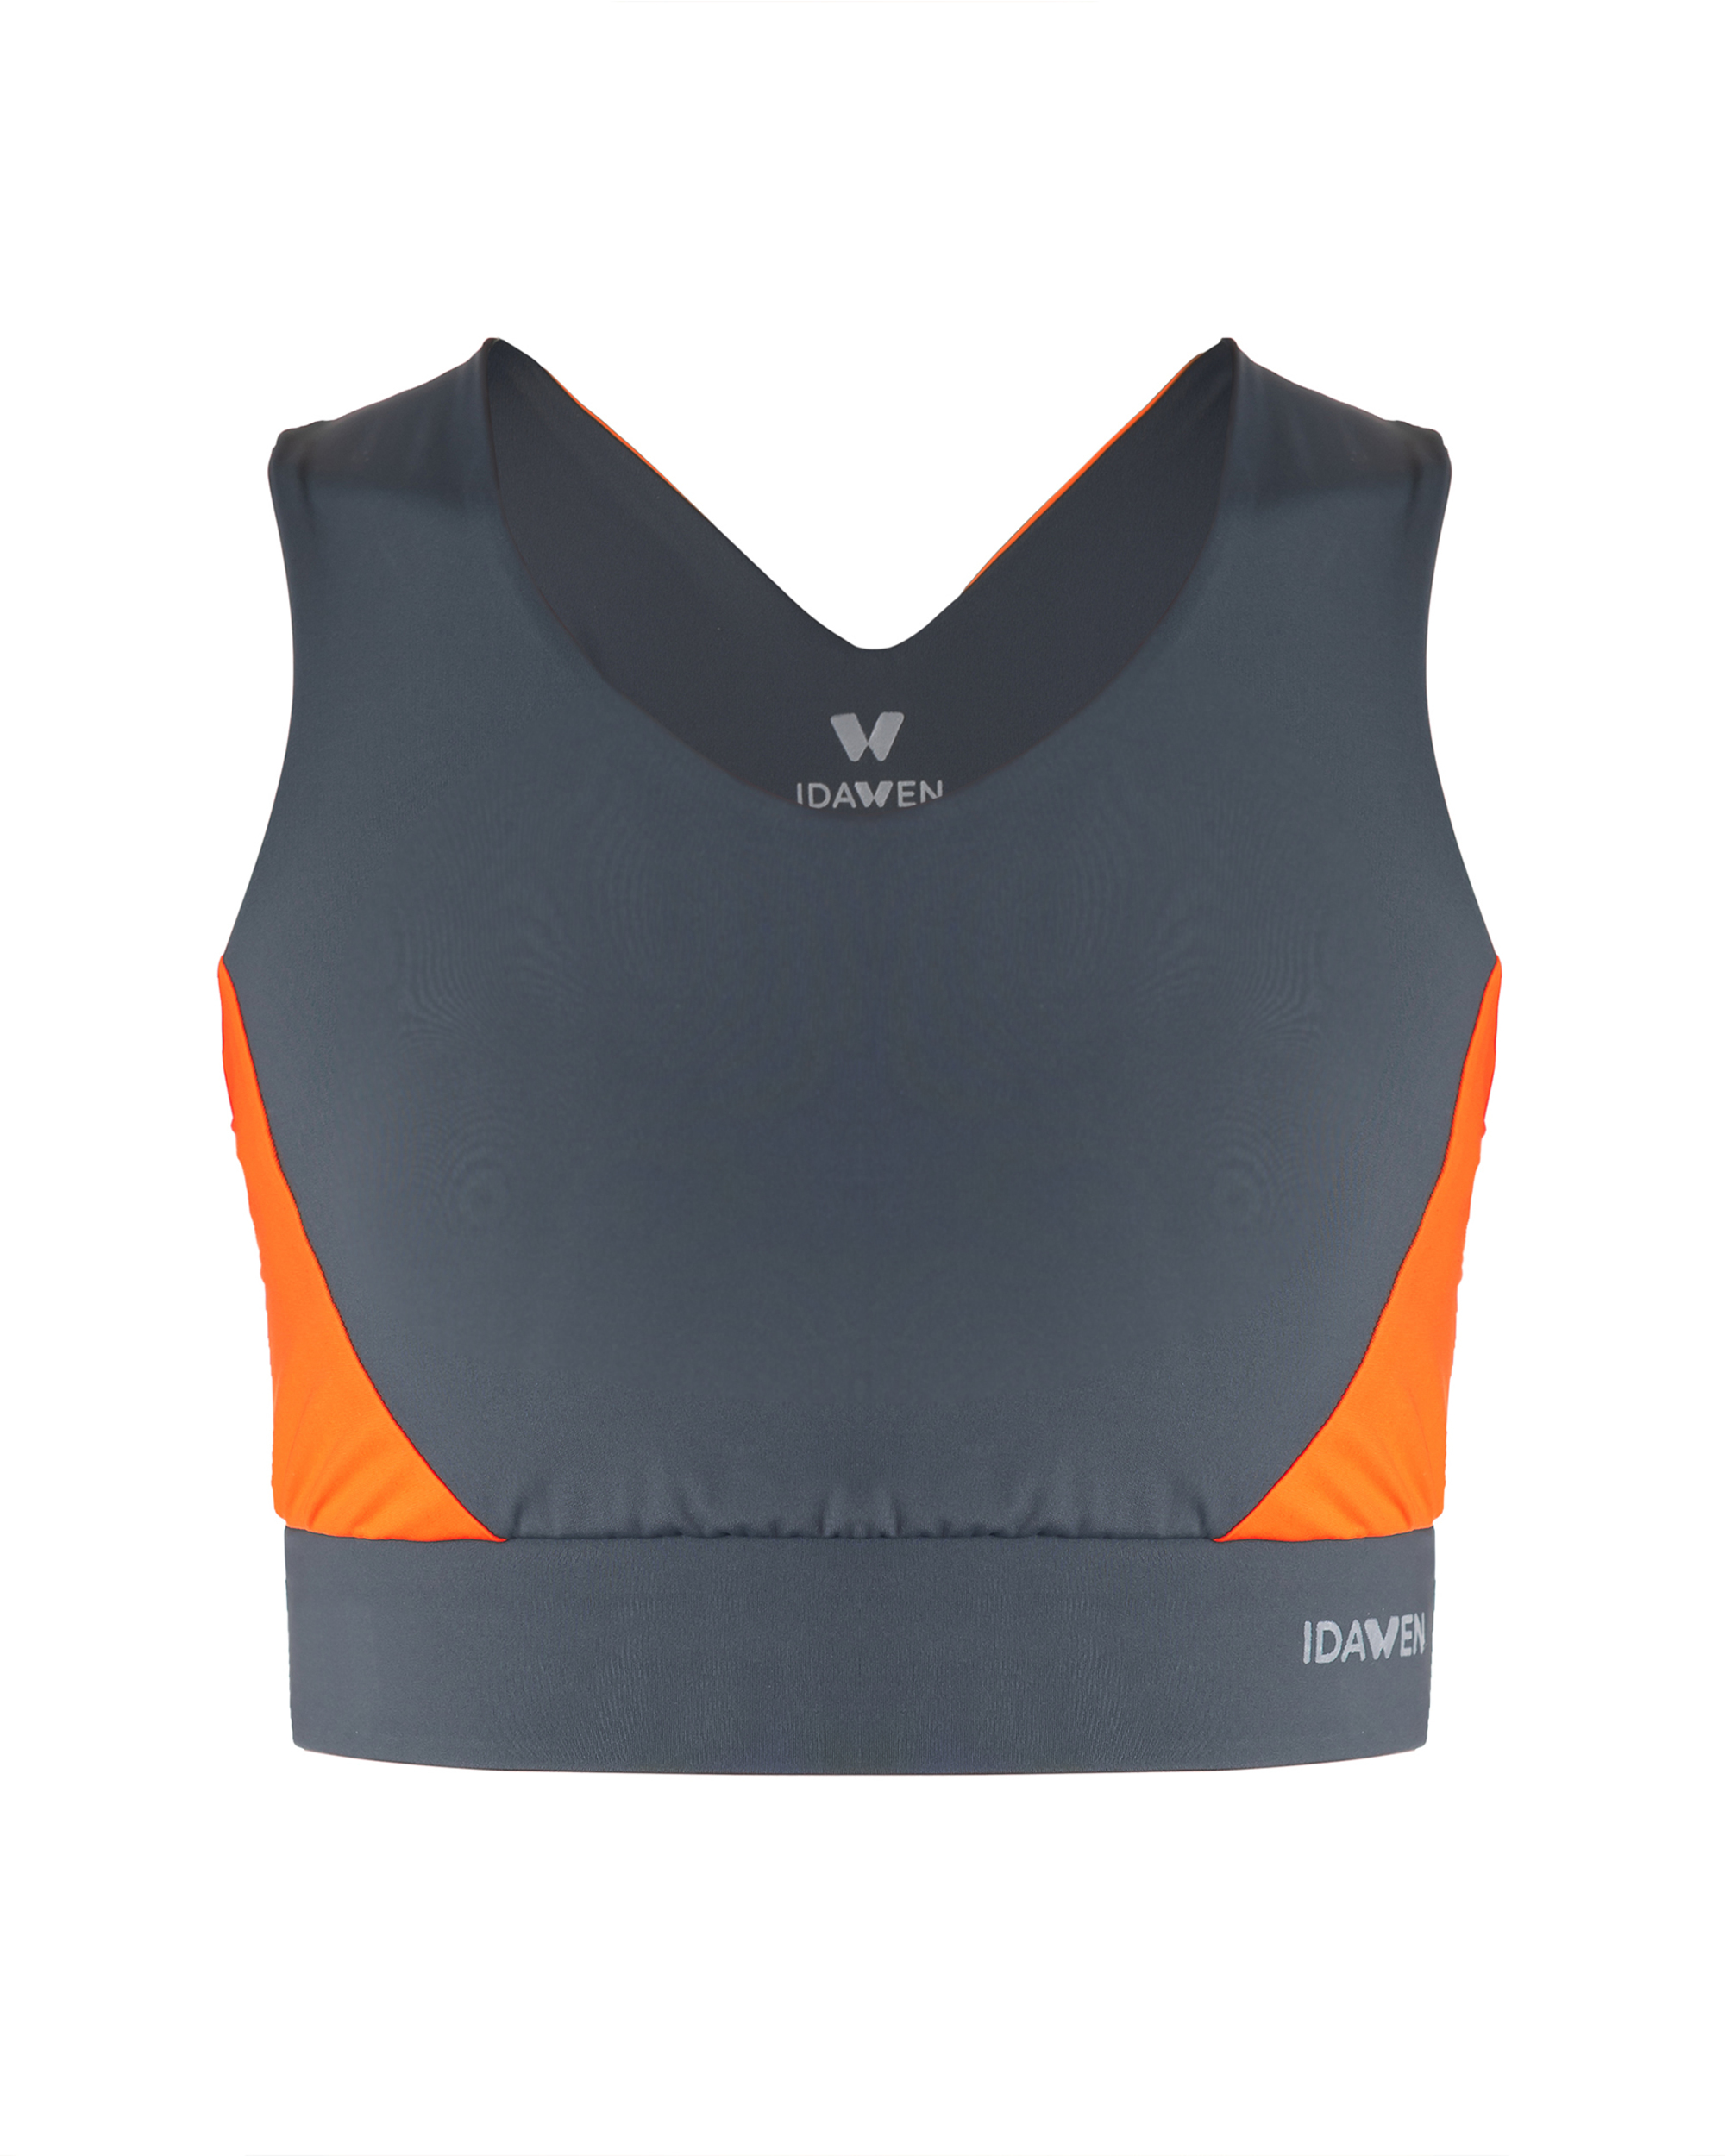 SPORT TOP GREY SPORTS BRAS AND TOPS CE IDAWEN - Woman and